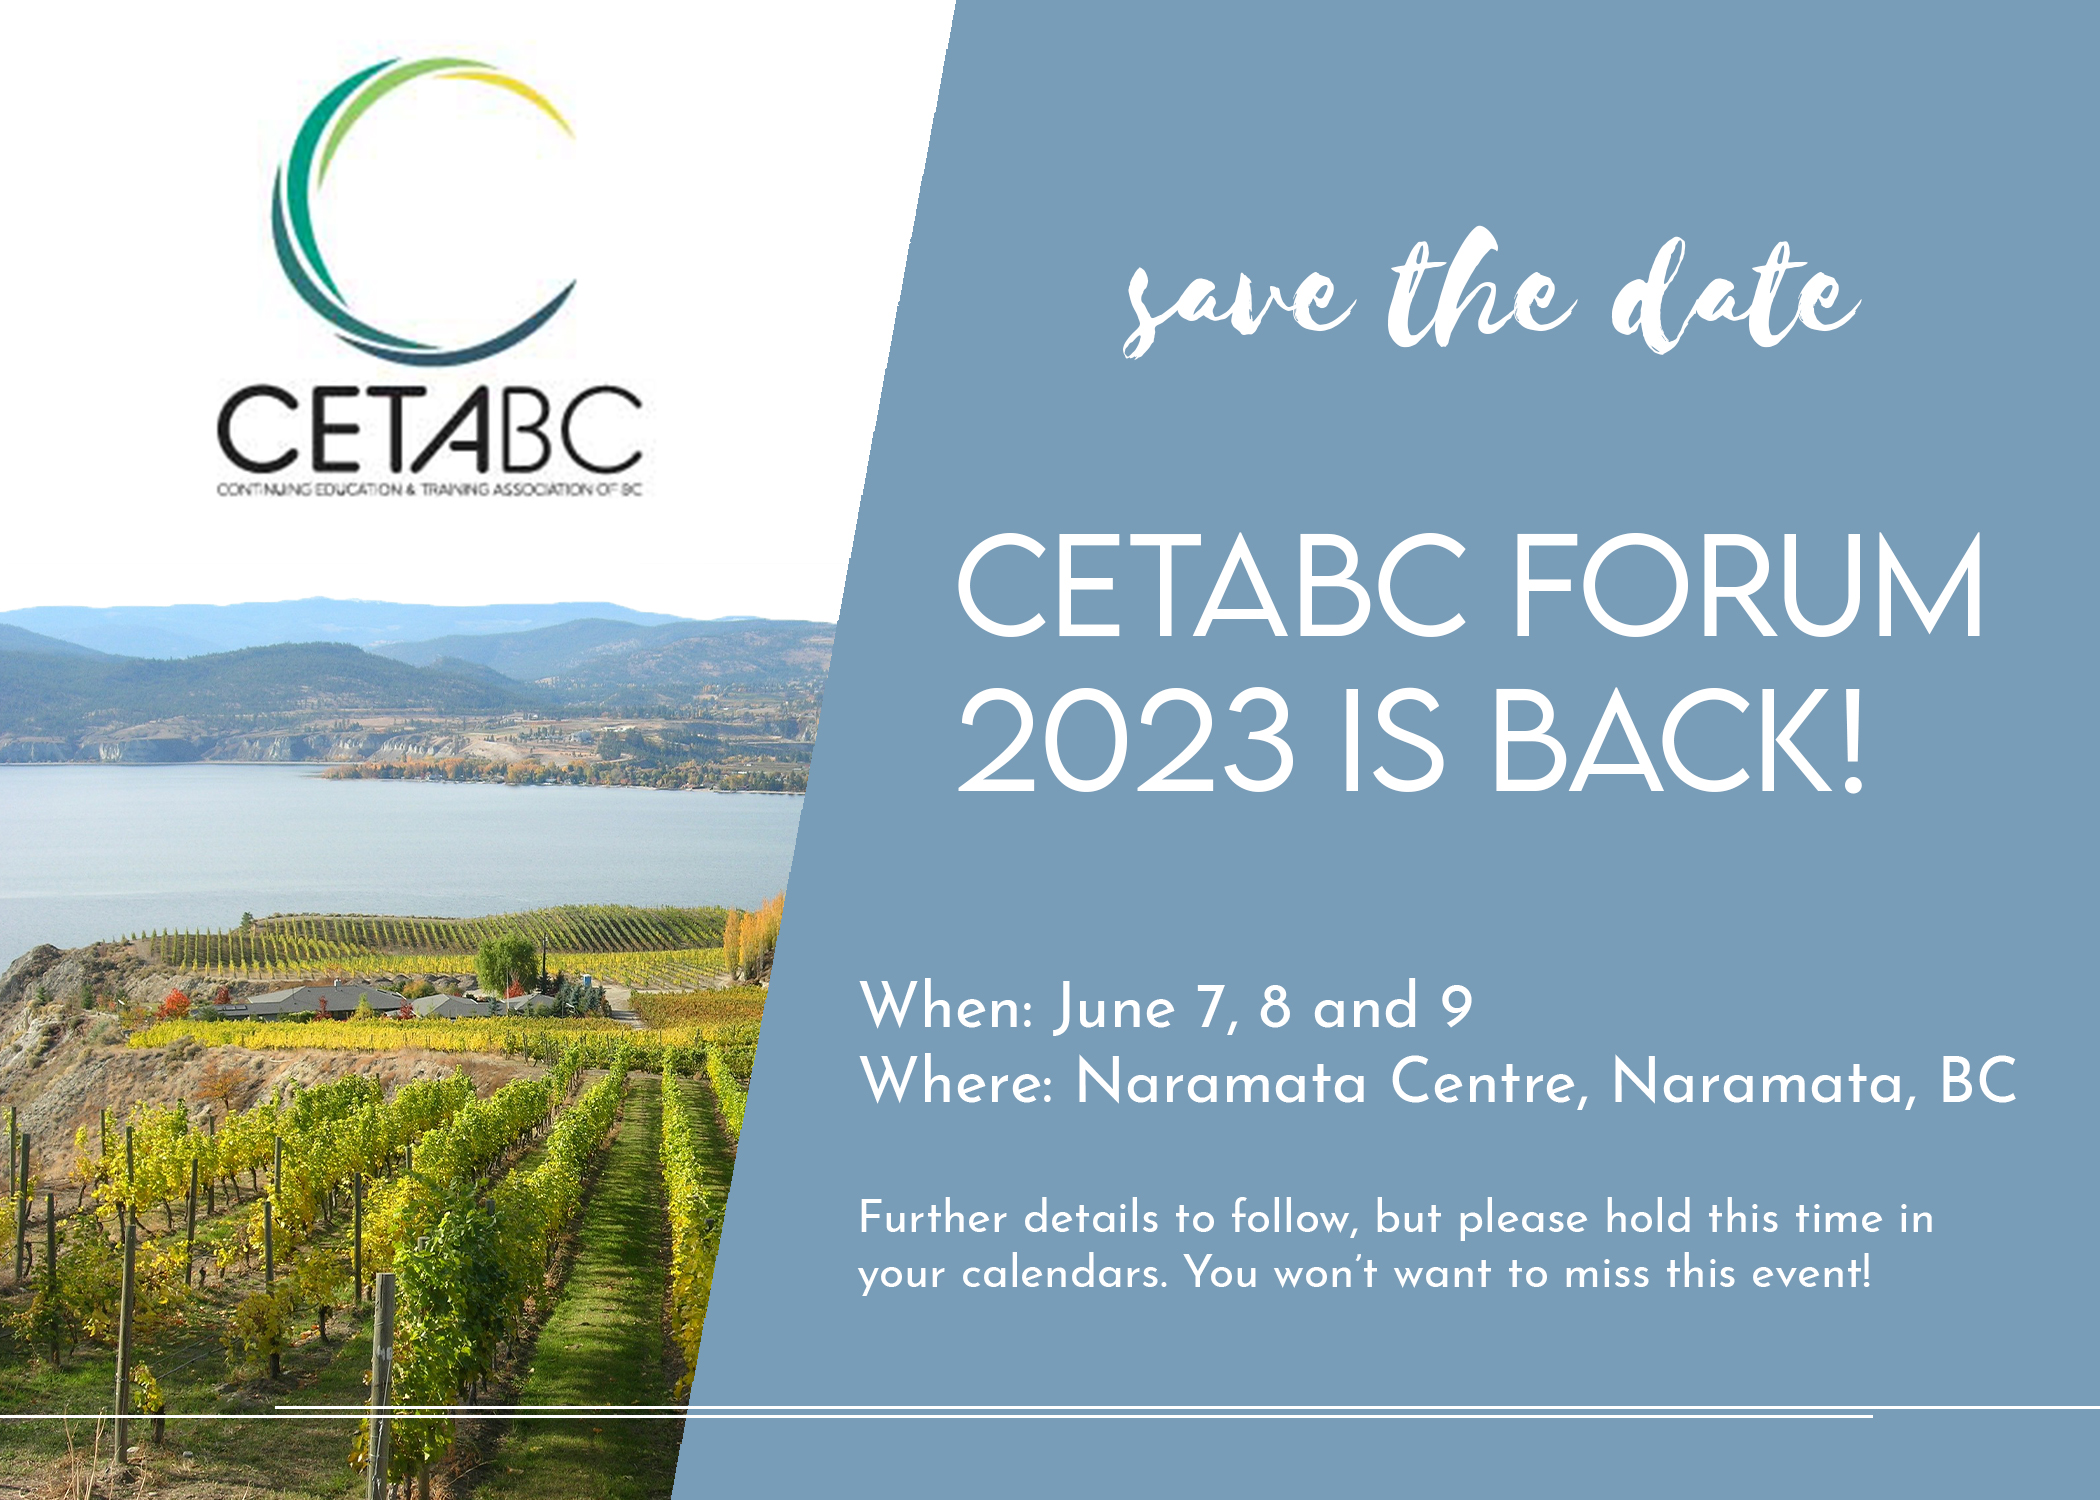 CETABC Save the date Forum 2023 is back; When: June 7, 8 and 9; Where: Naramata Centre, Naramata, BC, Further details to follow!